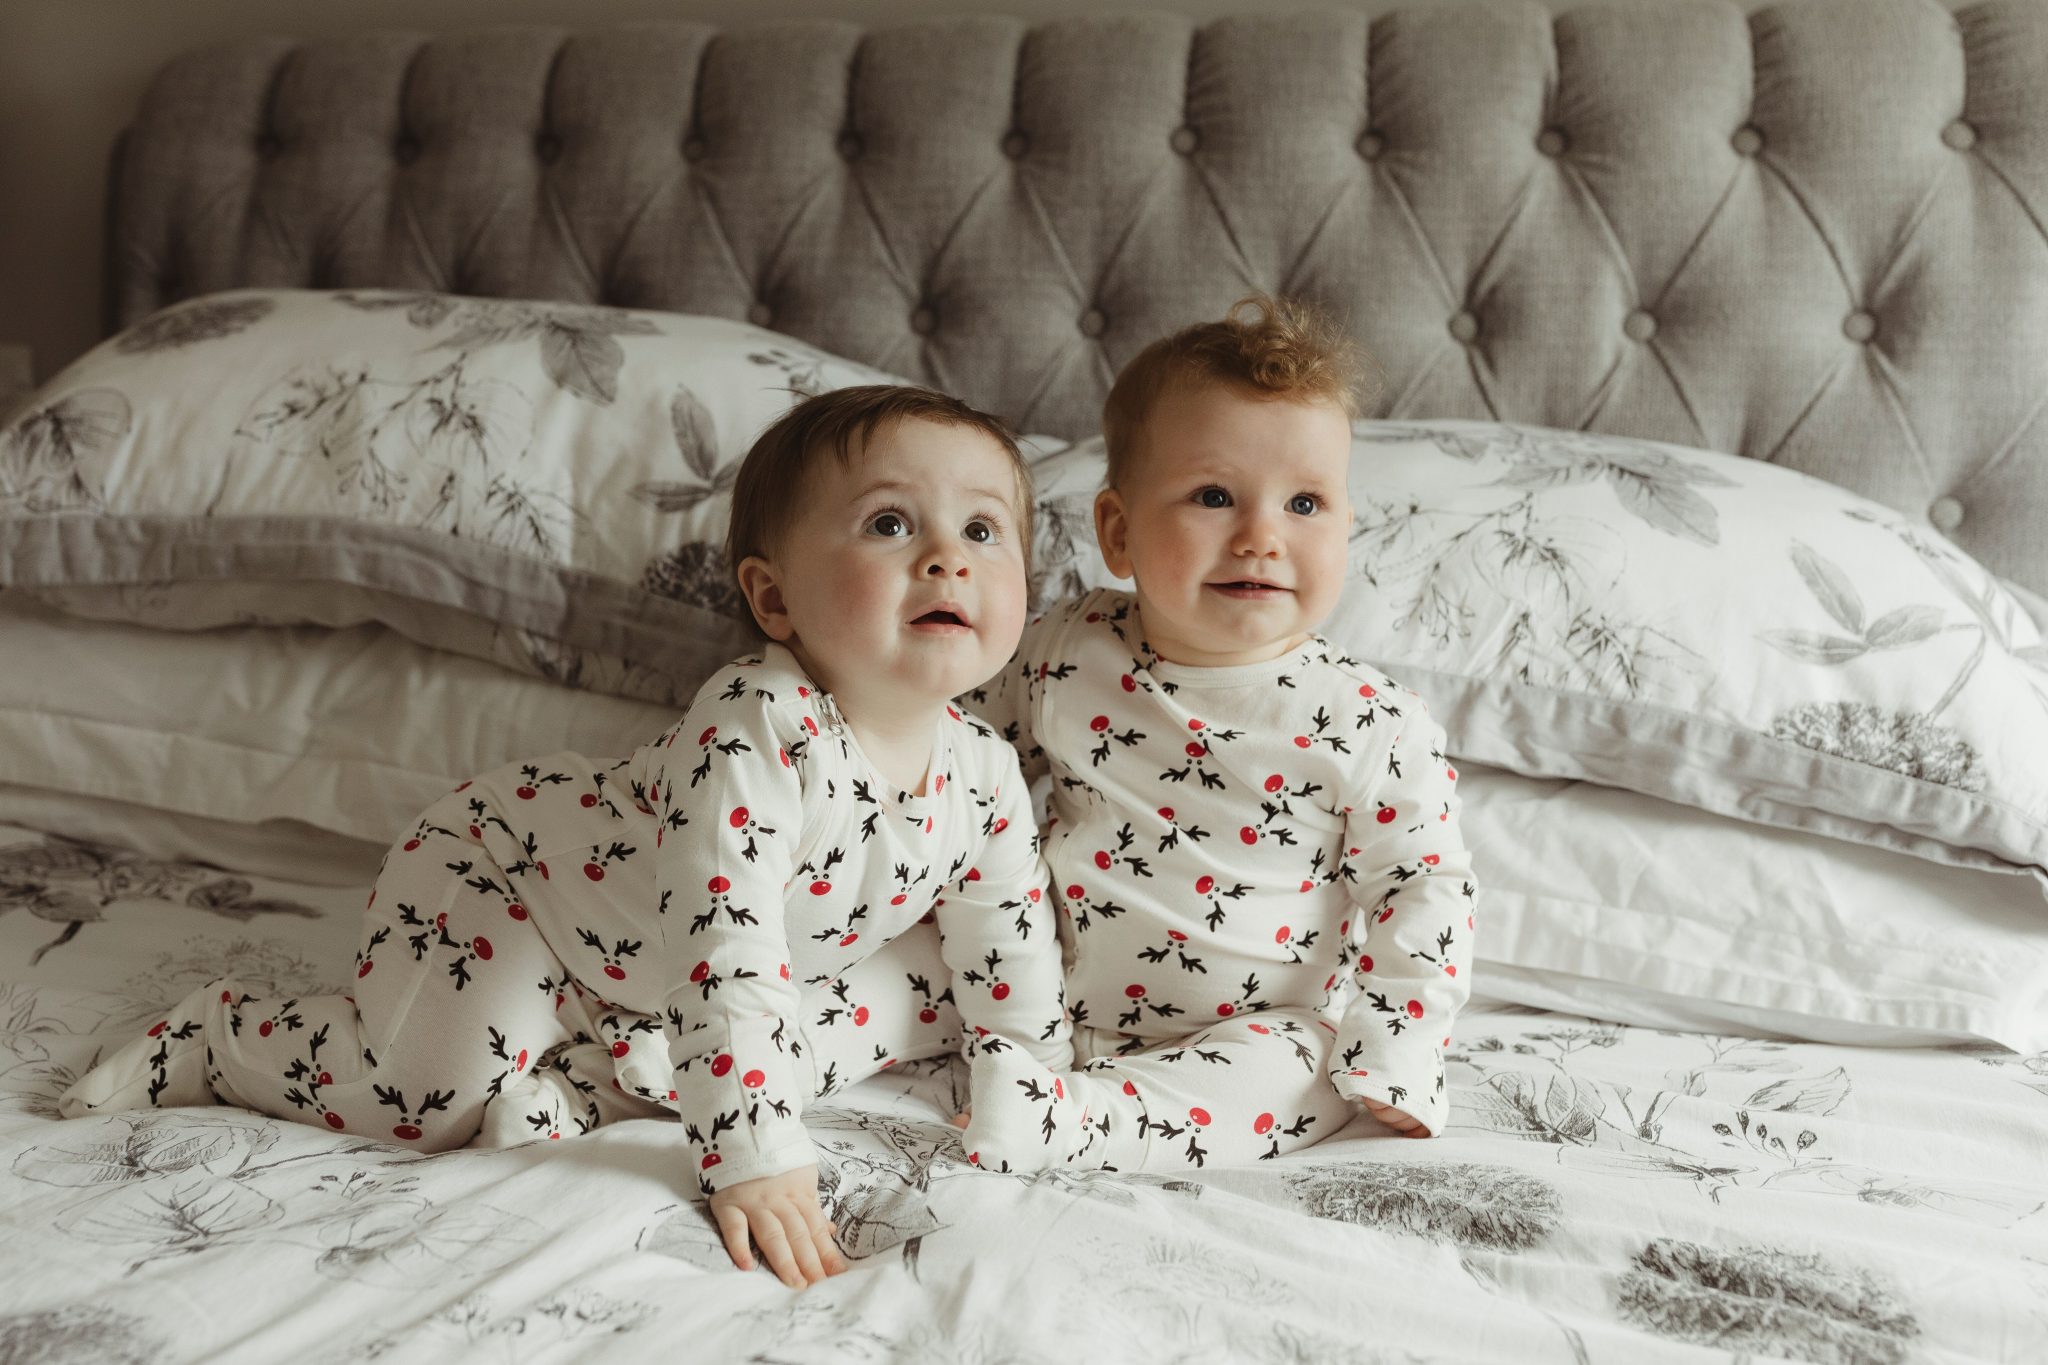 Lil & Izzy Boutique have launched a Christmas range and it’s so adorable